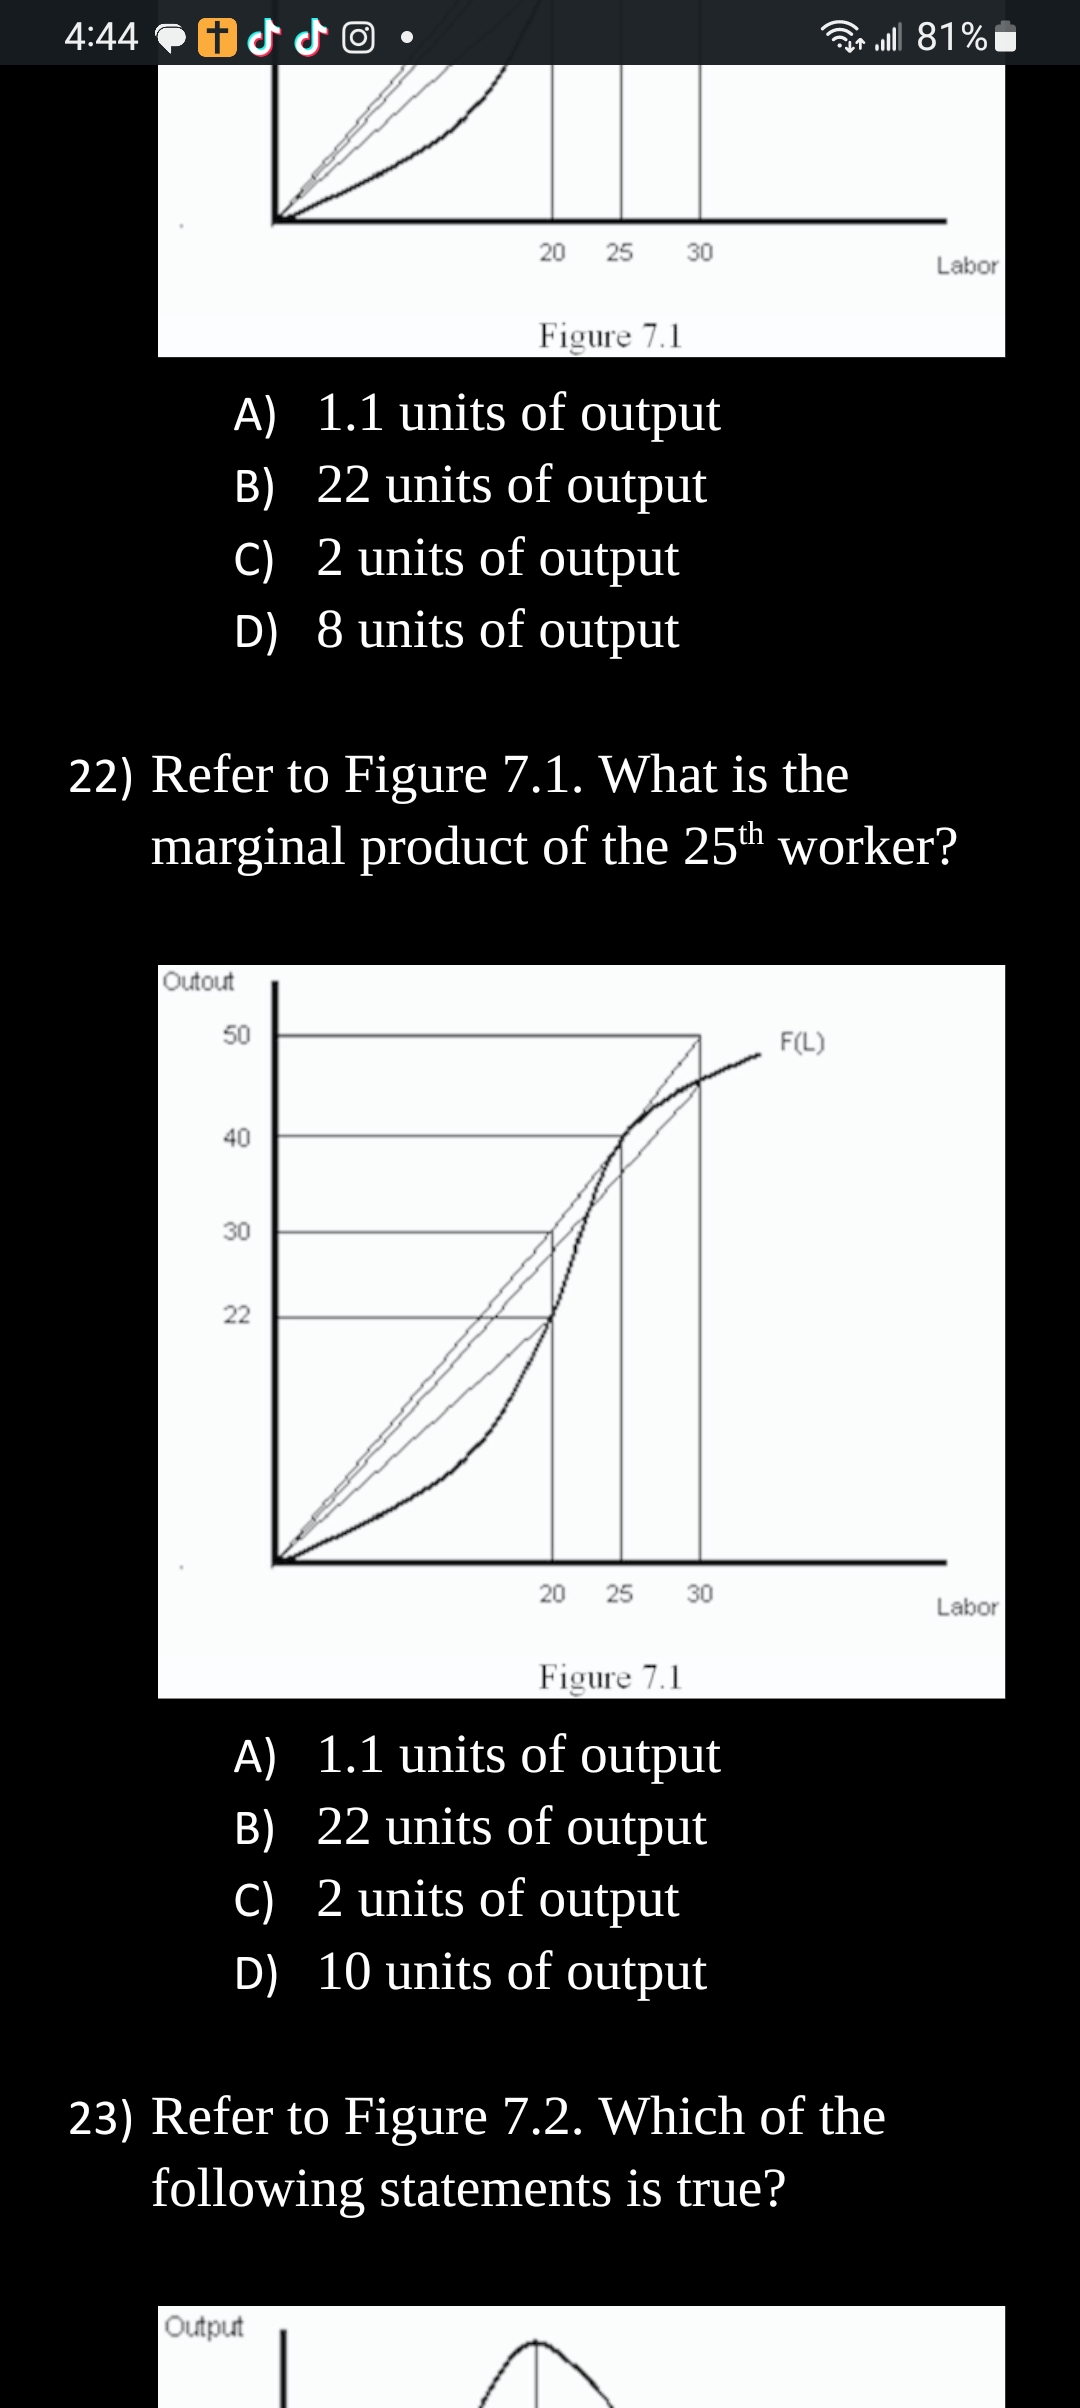 4:44
iddo
Figure 7.1
A) 1.1 units of output
B) 22 units of output
c) 2 units of output
D) 8 units of output
Outout
50
22) Refer to Figure 7.1. What is the
marginal product of the 25th worker?
40
30
20 25 30
22
20 25 30
Figure 7.1
A) 1.1 units of output
B) 22 units of output
c)
2 units of output
D) 10 units of output
Output
F(L)
23) Refer to Figure 7.2. Which of the
following statements is true?
| 81%
Labor
Labor